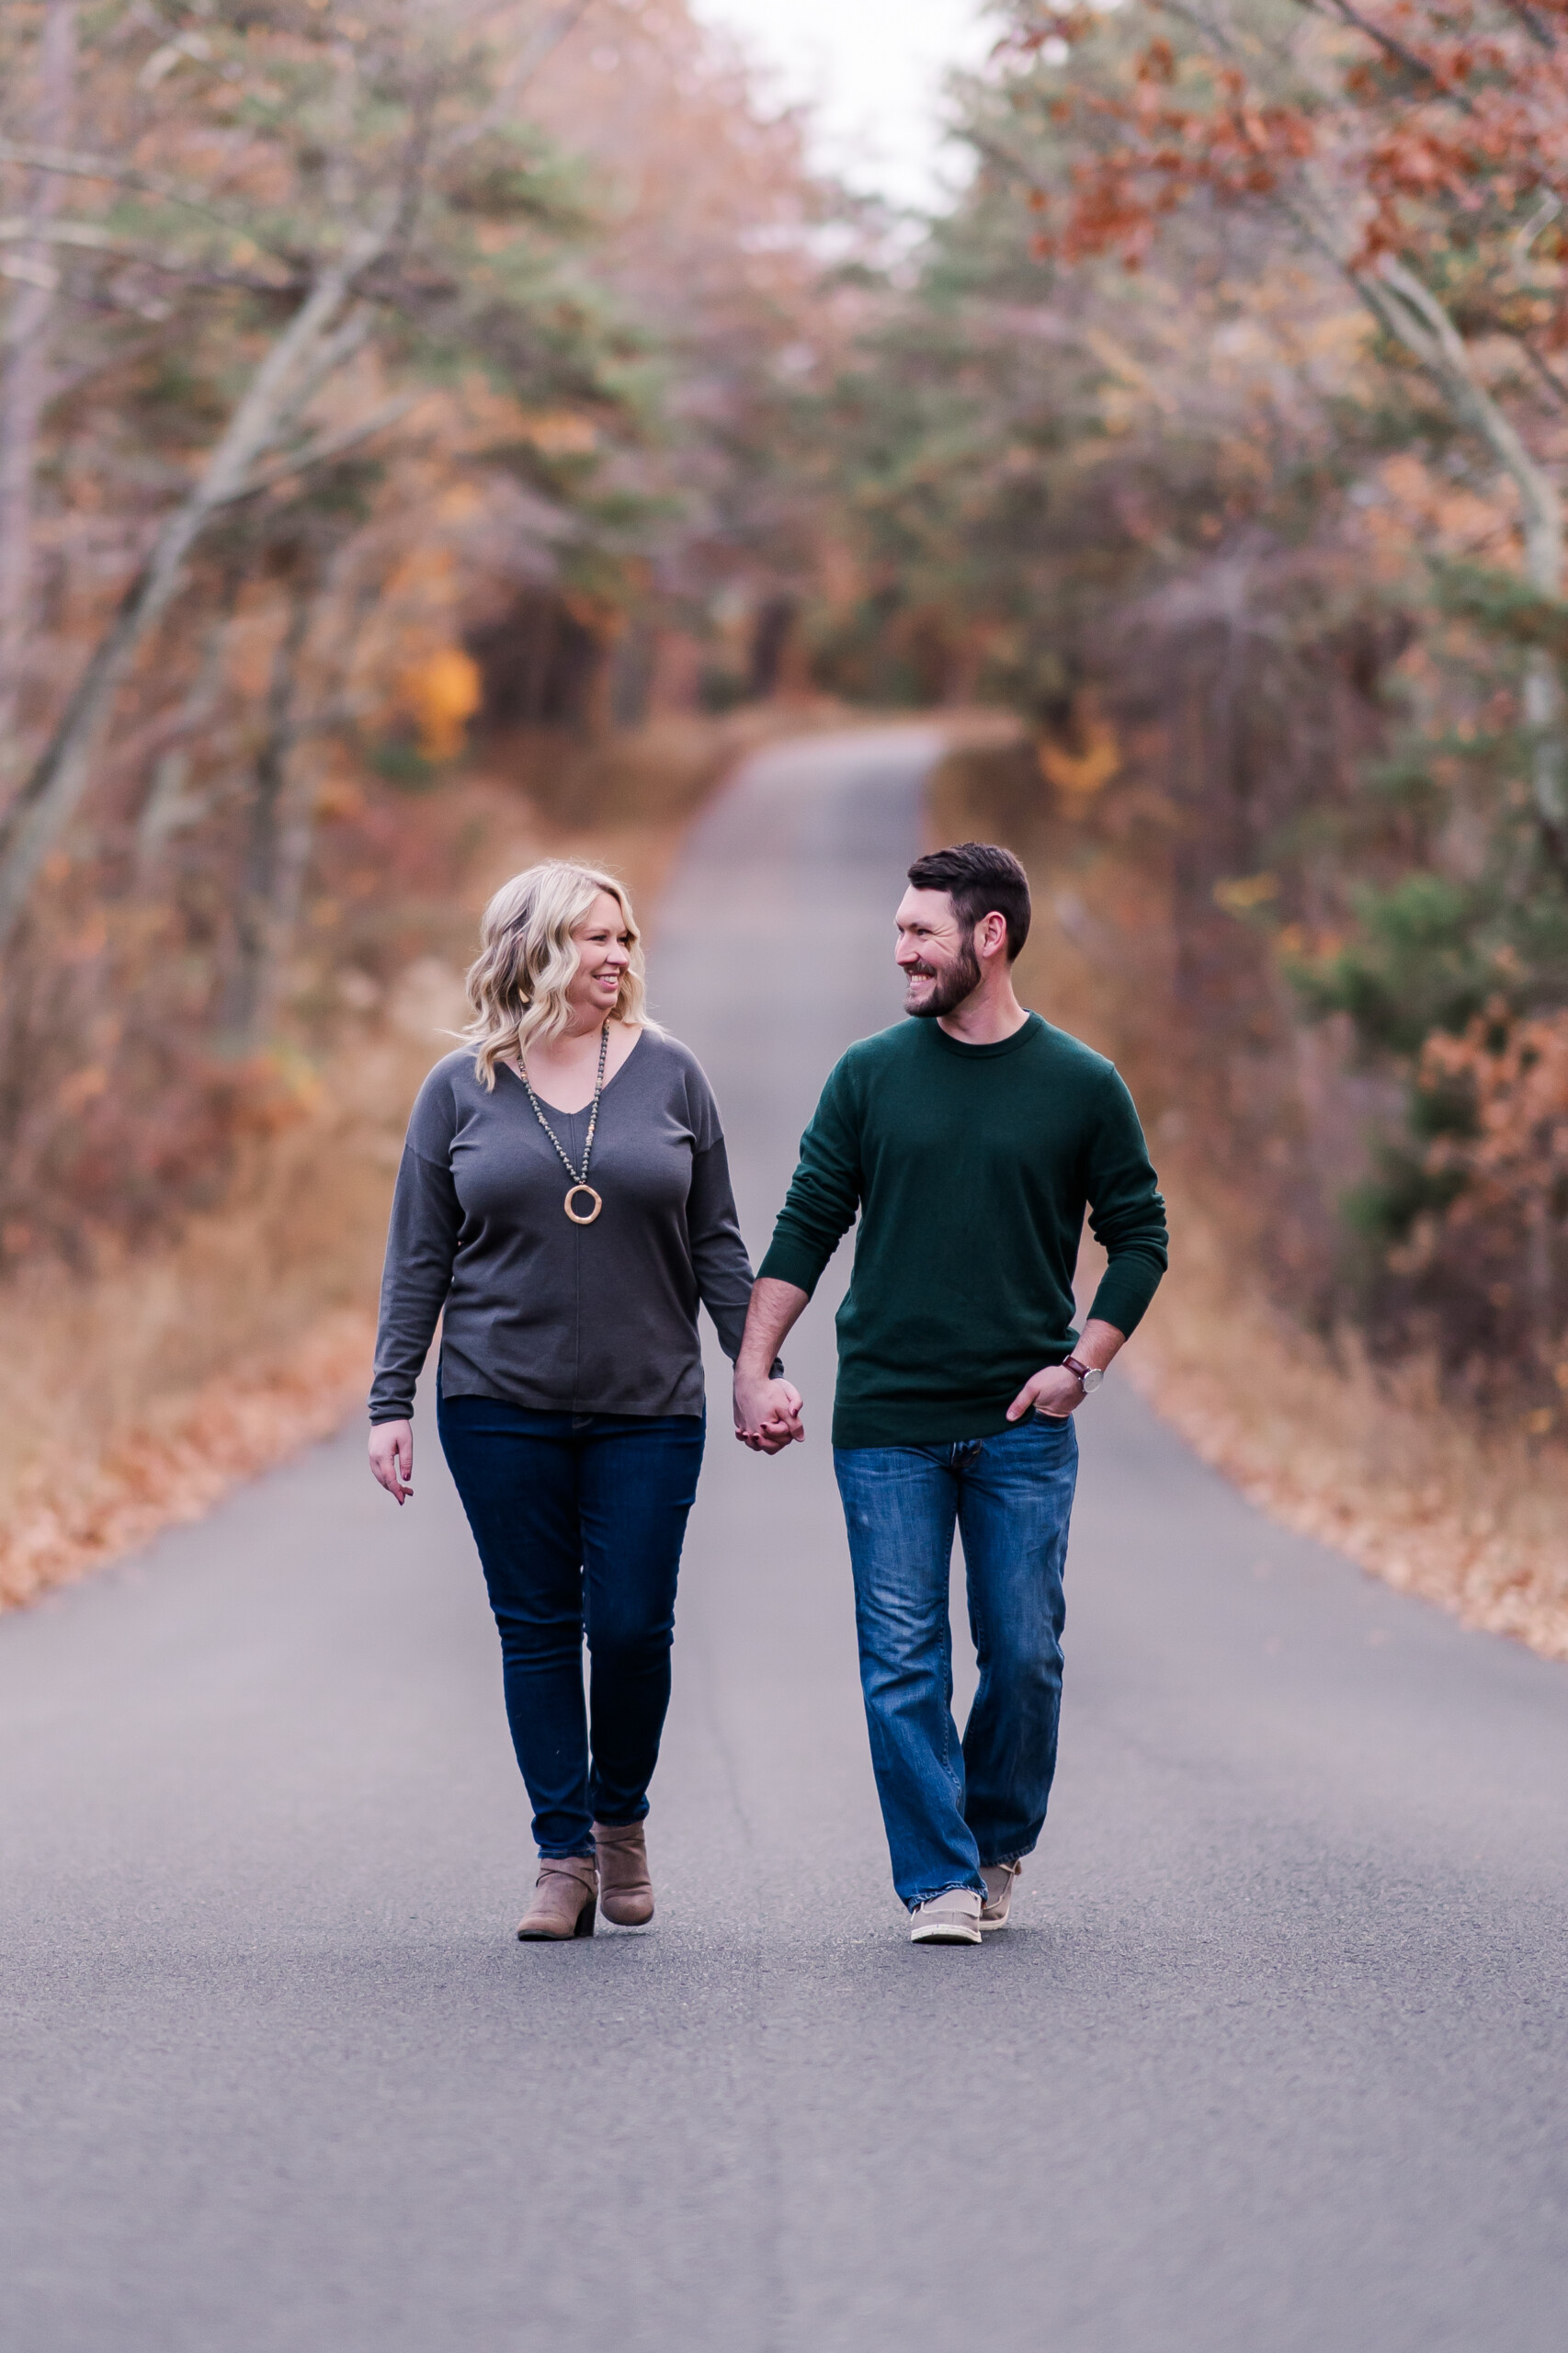 Chilhowee Overlook Engaged Couple